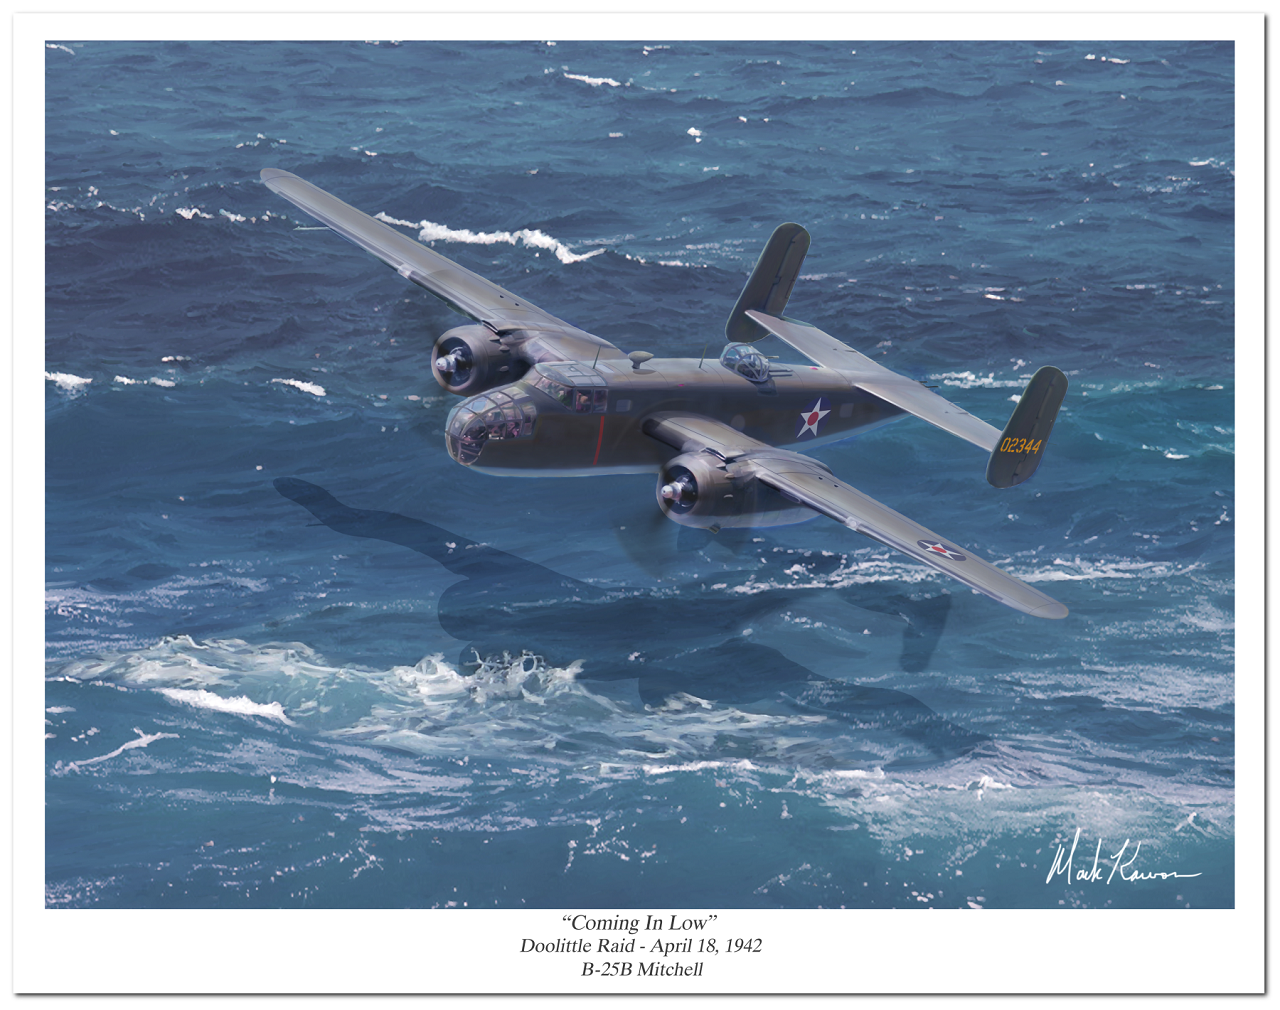 "Coming in Low" by Mark Karvon, a USAAF B-25 Mitchell during the Doolittle Raid